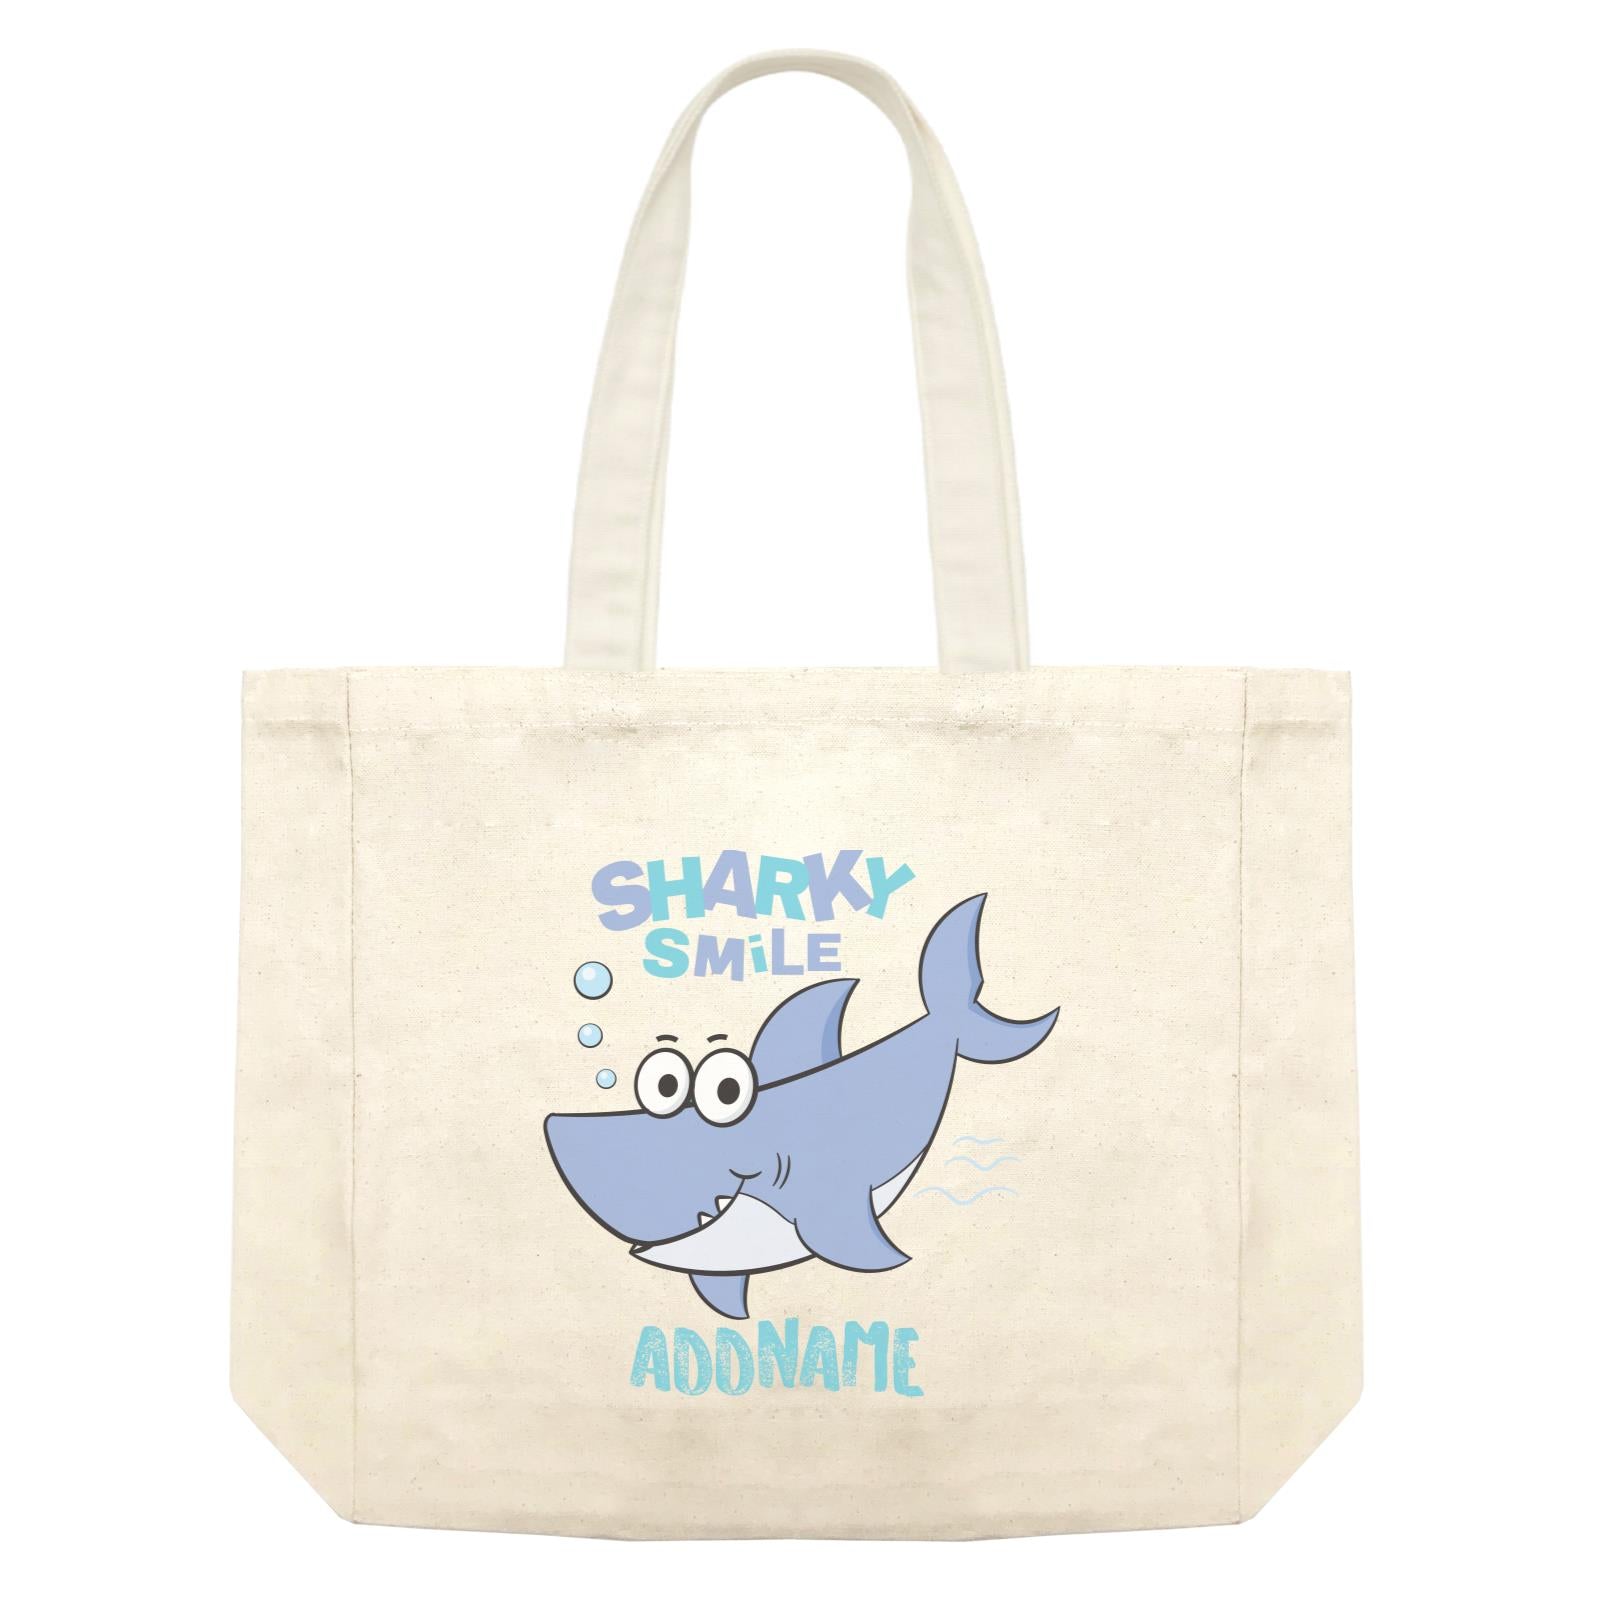 Cool Cute Sea Animals Sharky Smile Addname Shopping Bag